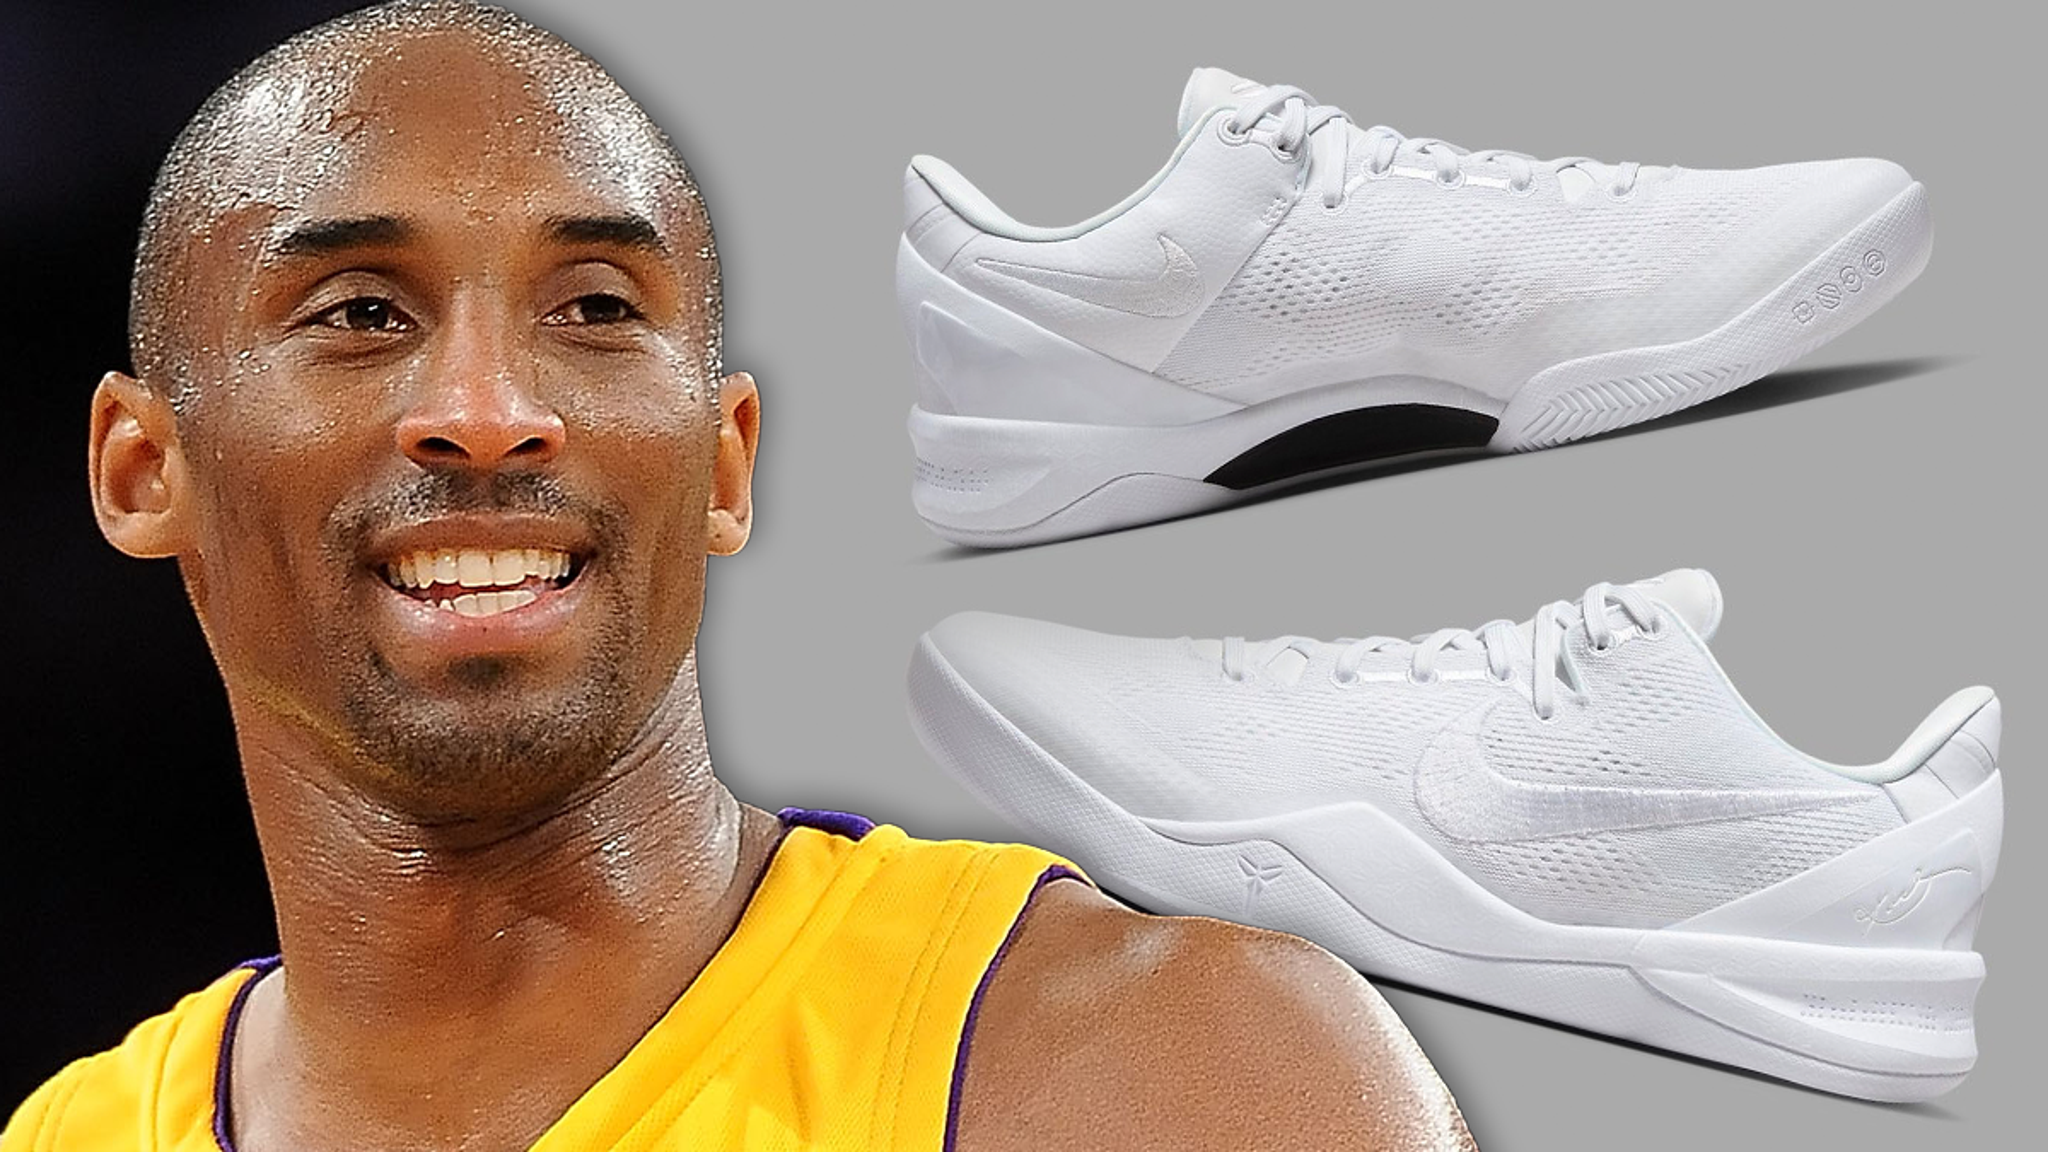 Nike releases first images of Kobe Bryant "Halo" Protro 8 designed by Vanessa